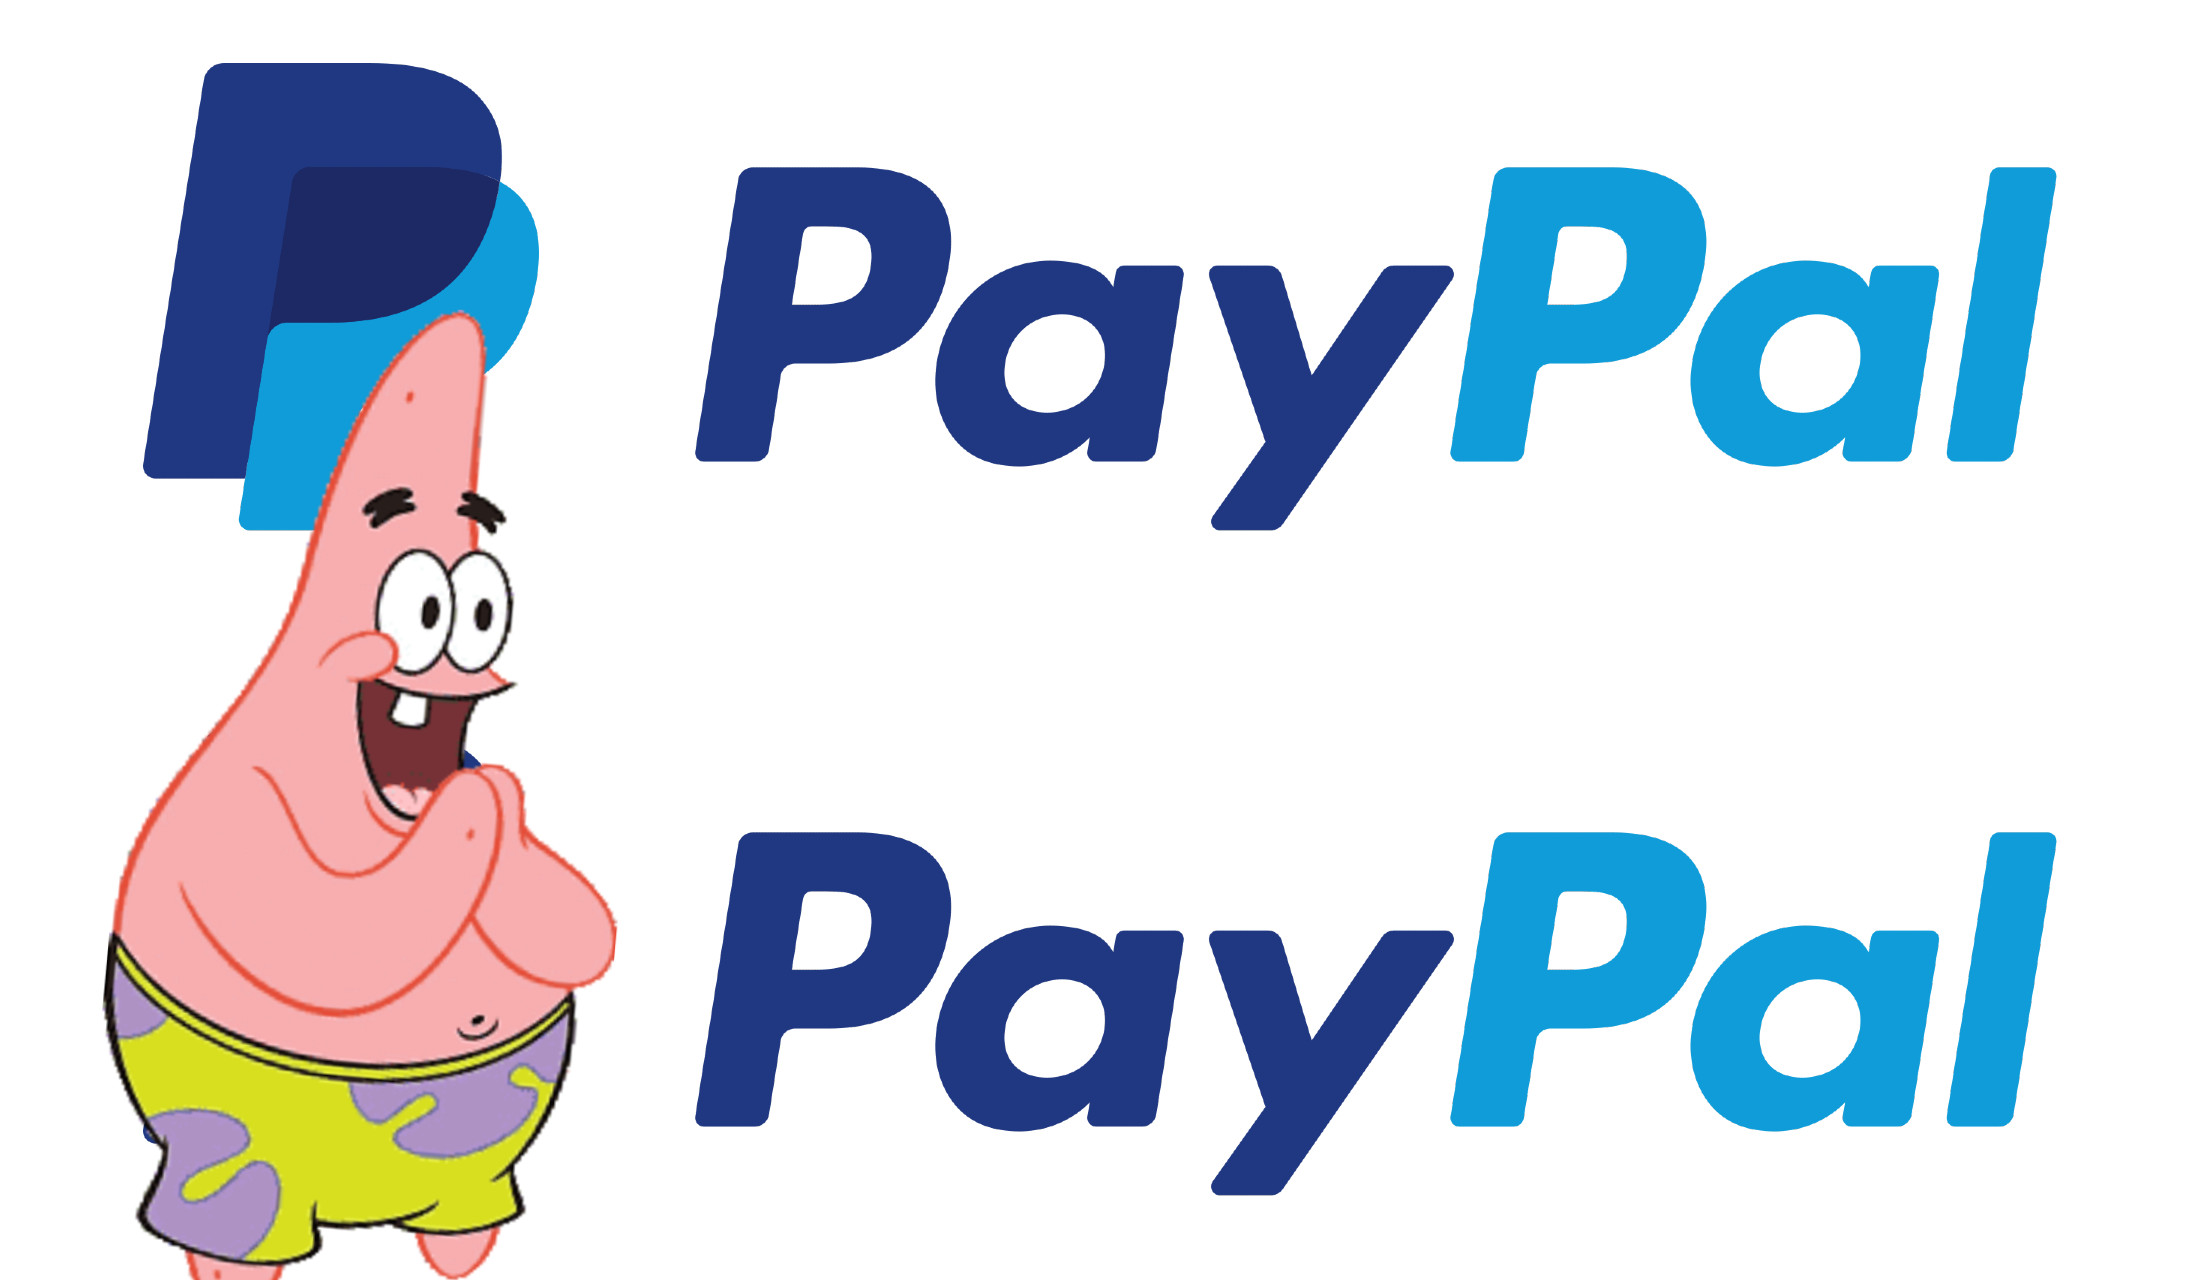 Can I have 2 or more PayPal accounts ?